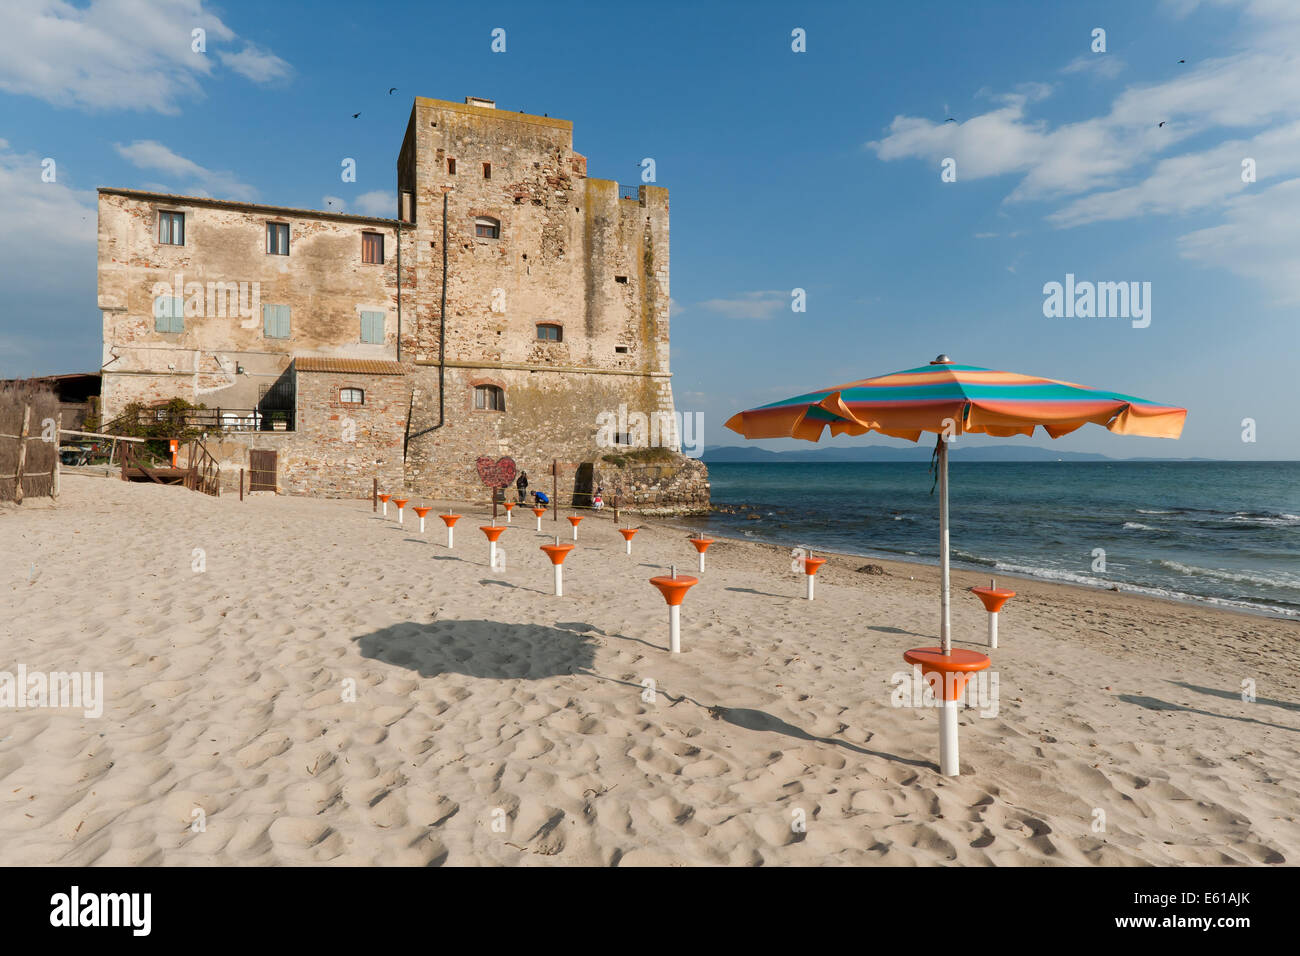 Torre Mozza is a 16th century Tuscan coastal tower, now a renowed 'blue flag' beach in Tuscany, Italy Stock Photo